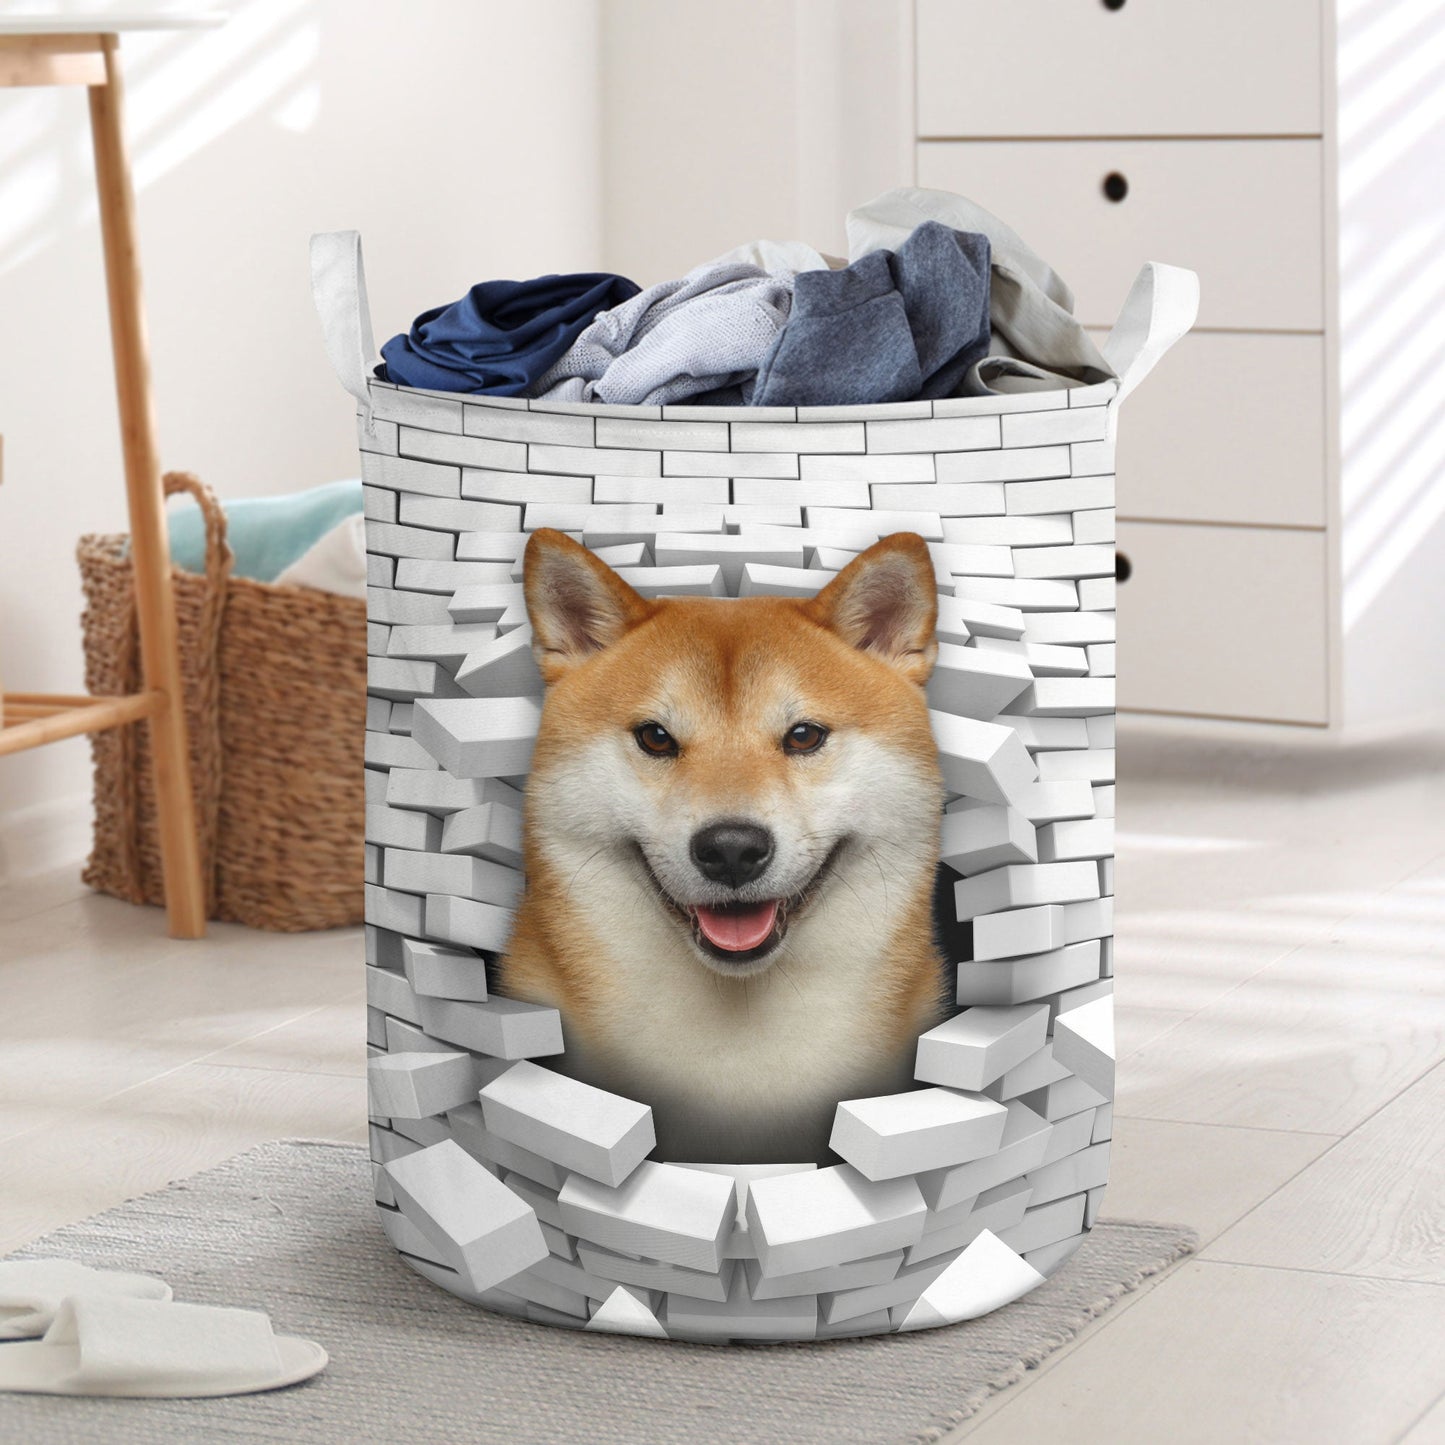 Shiba Inu - In The Hole Of Wall Pattern Laundry Basket